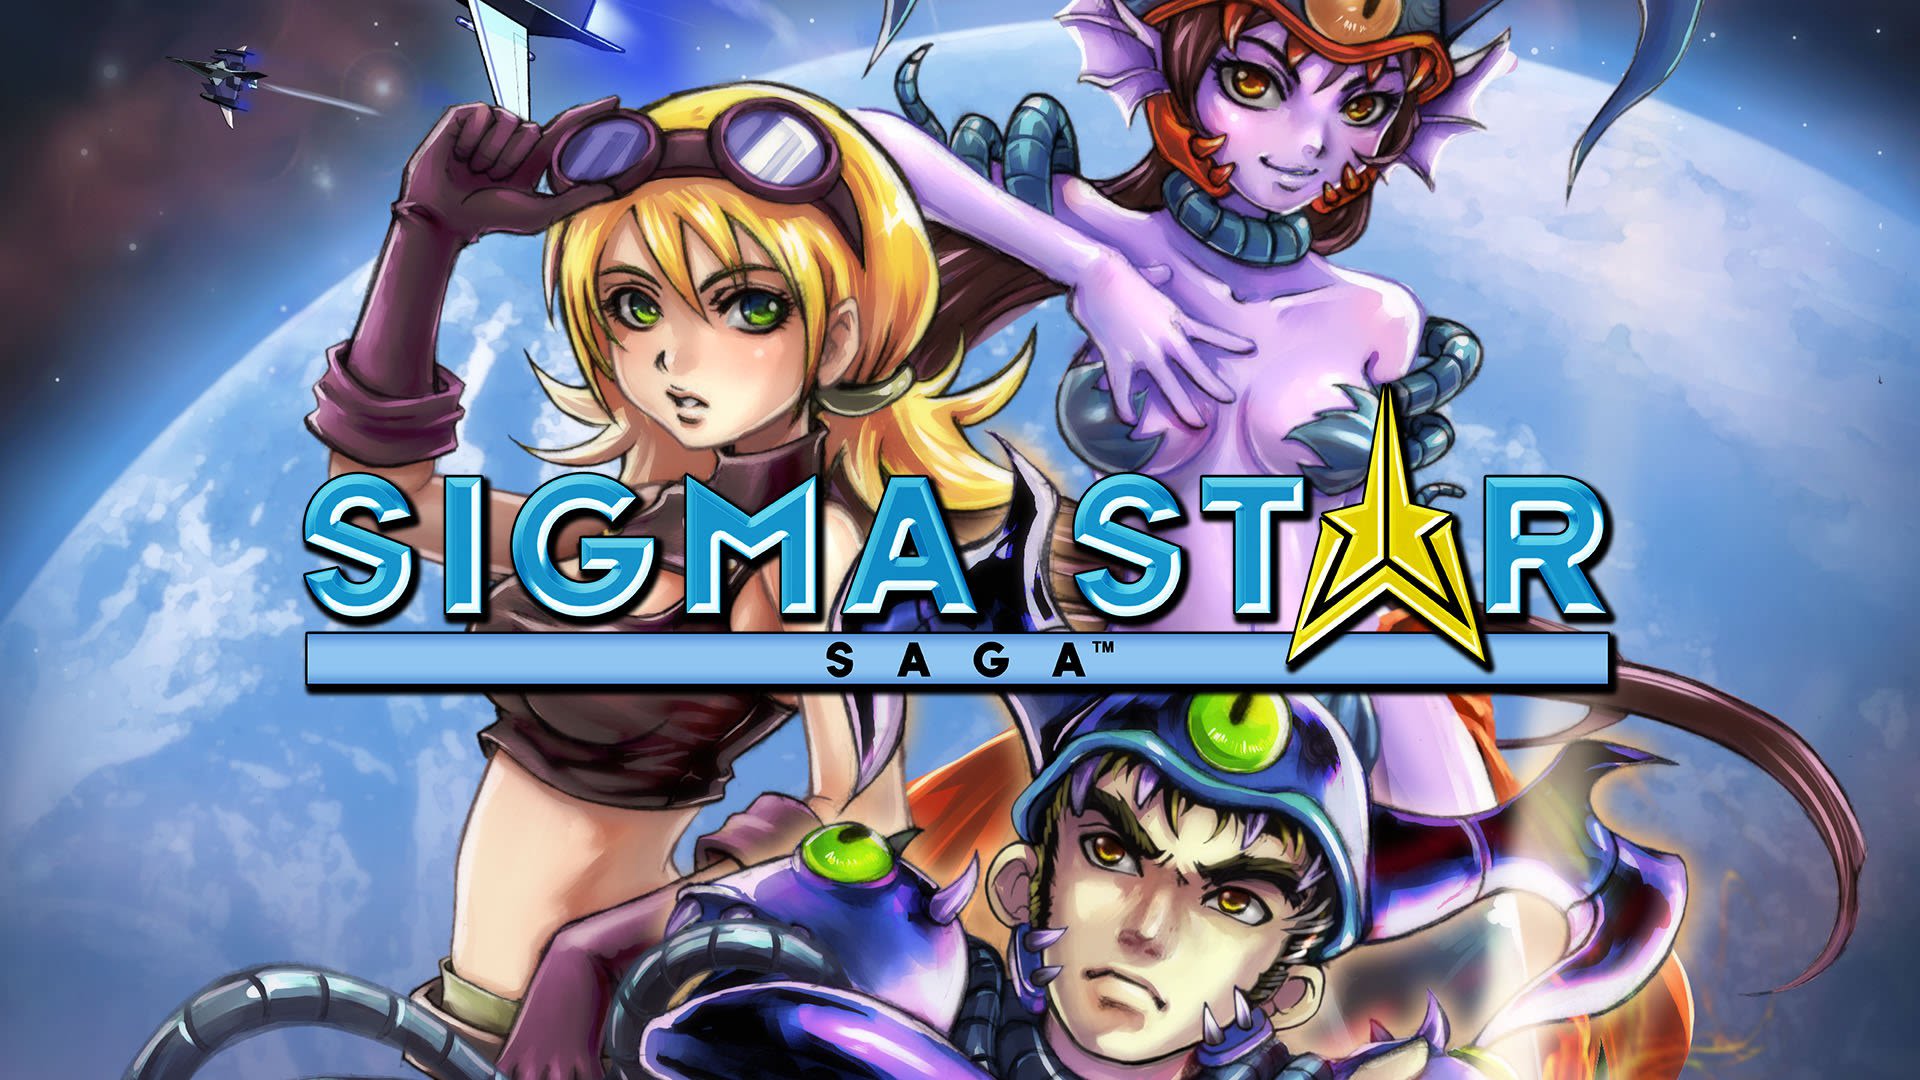 Game Boy Advance shoot ’em up RPG Sigma Star Saga coming to modern consoles, PC in 2025